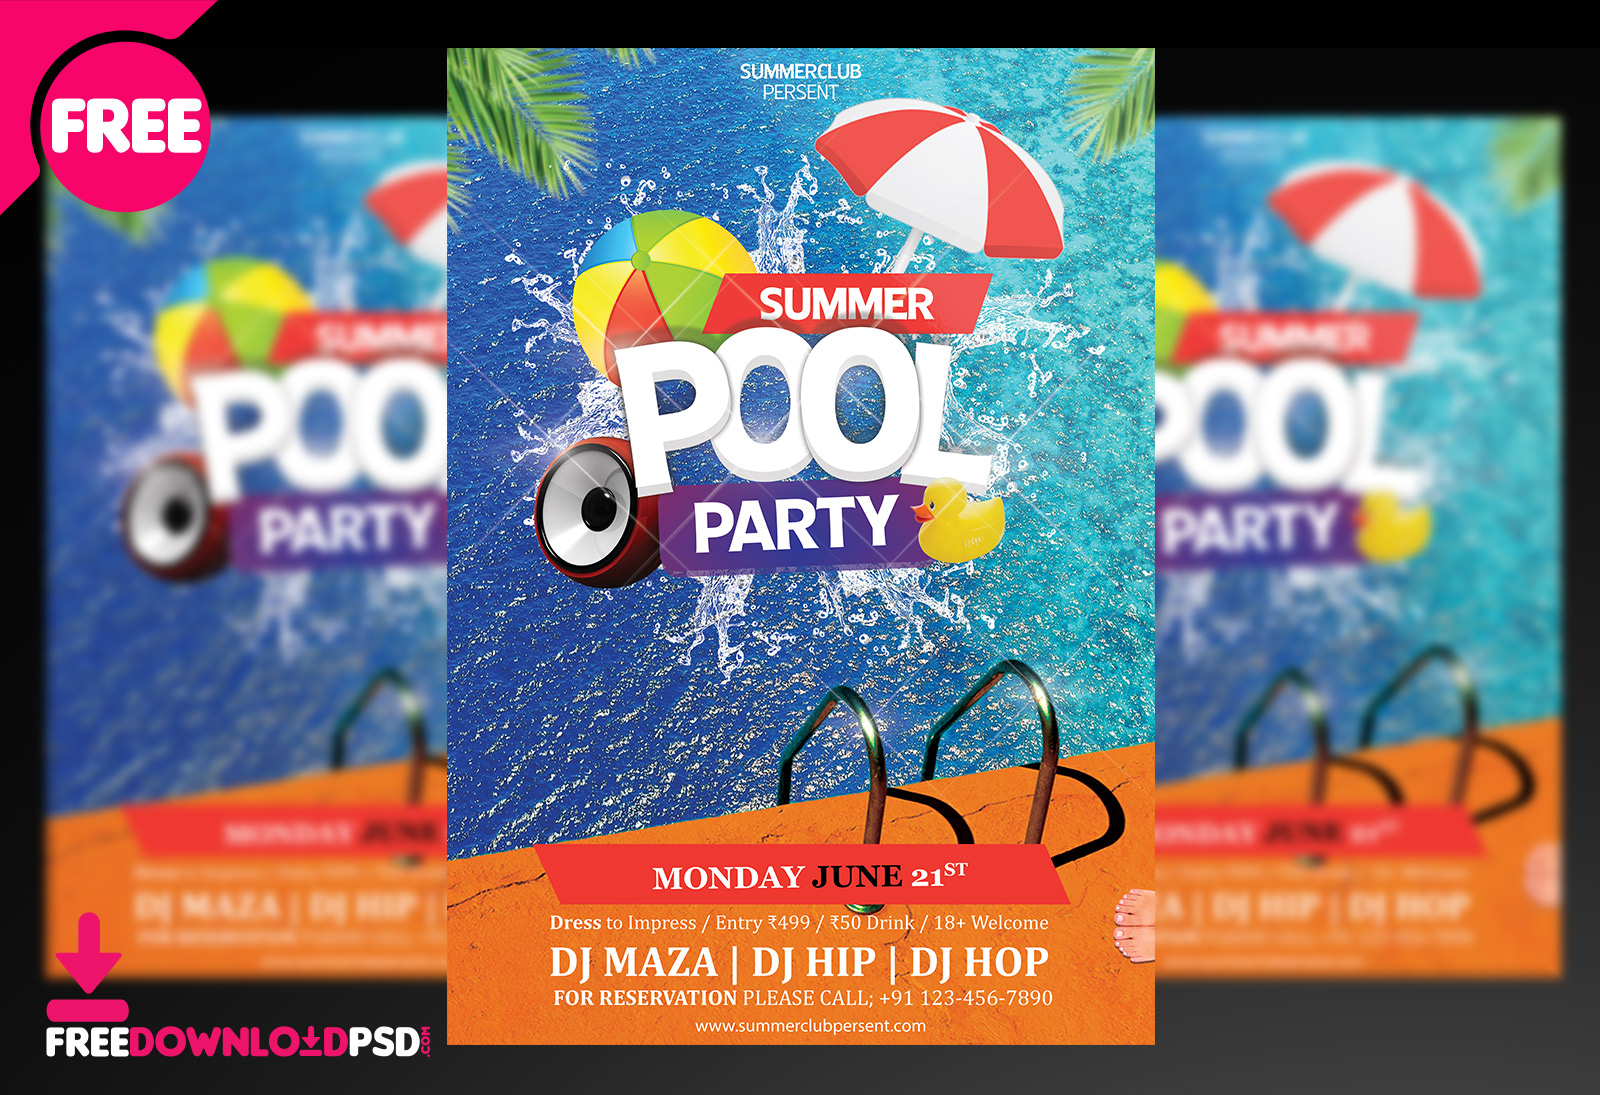 Pool Party PSD Flyer  FreedownloadPSD.com For Free Pool Party Flyer Templates